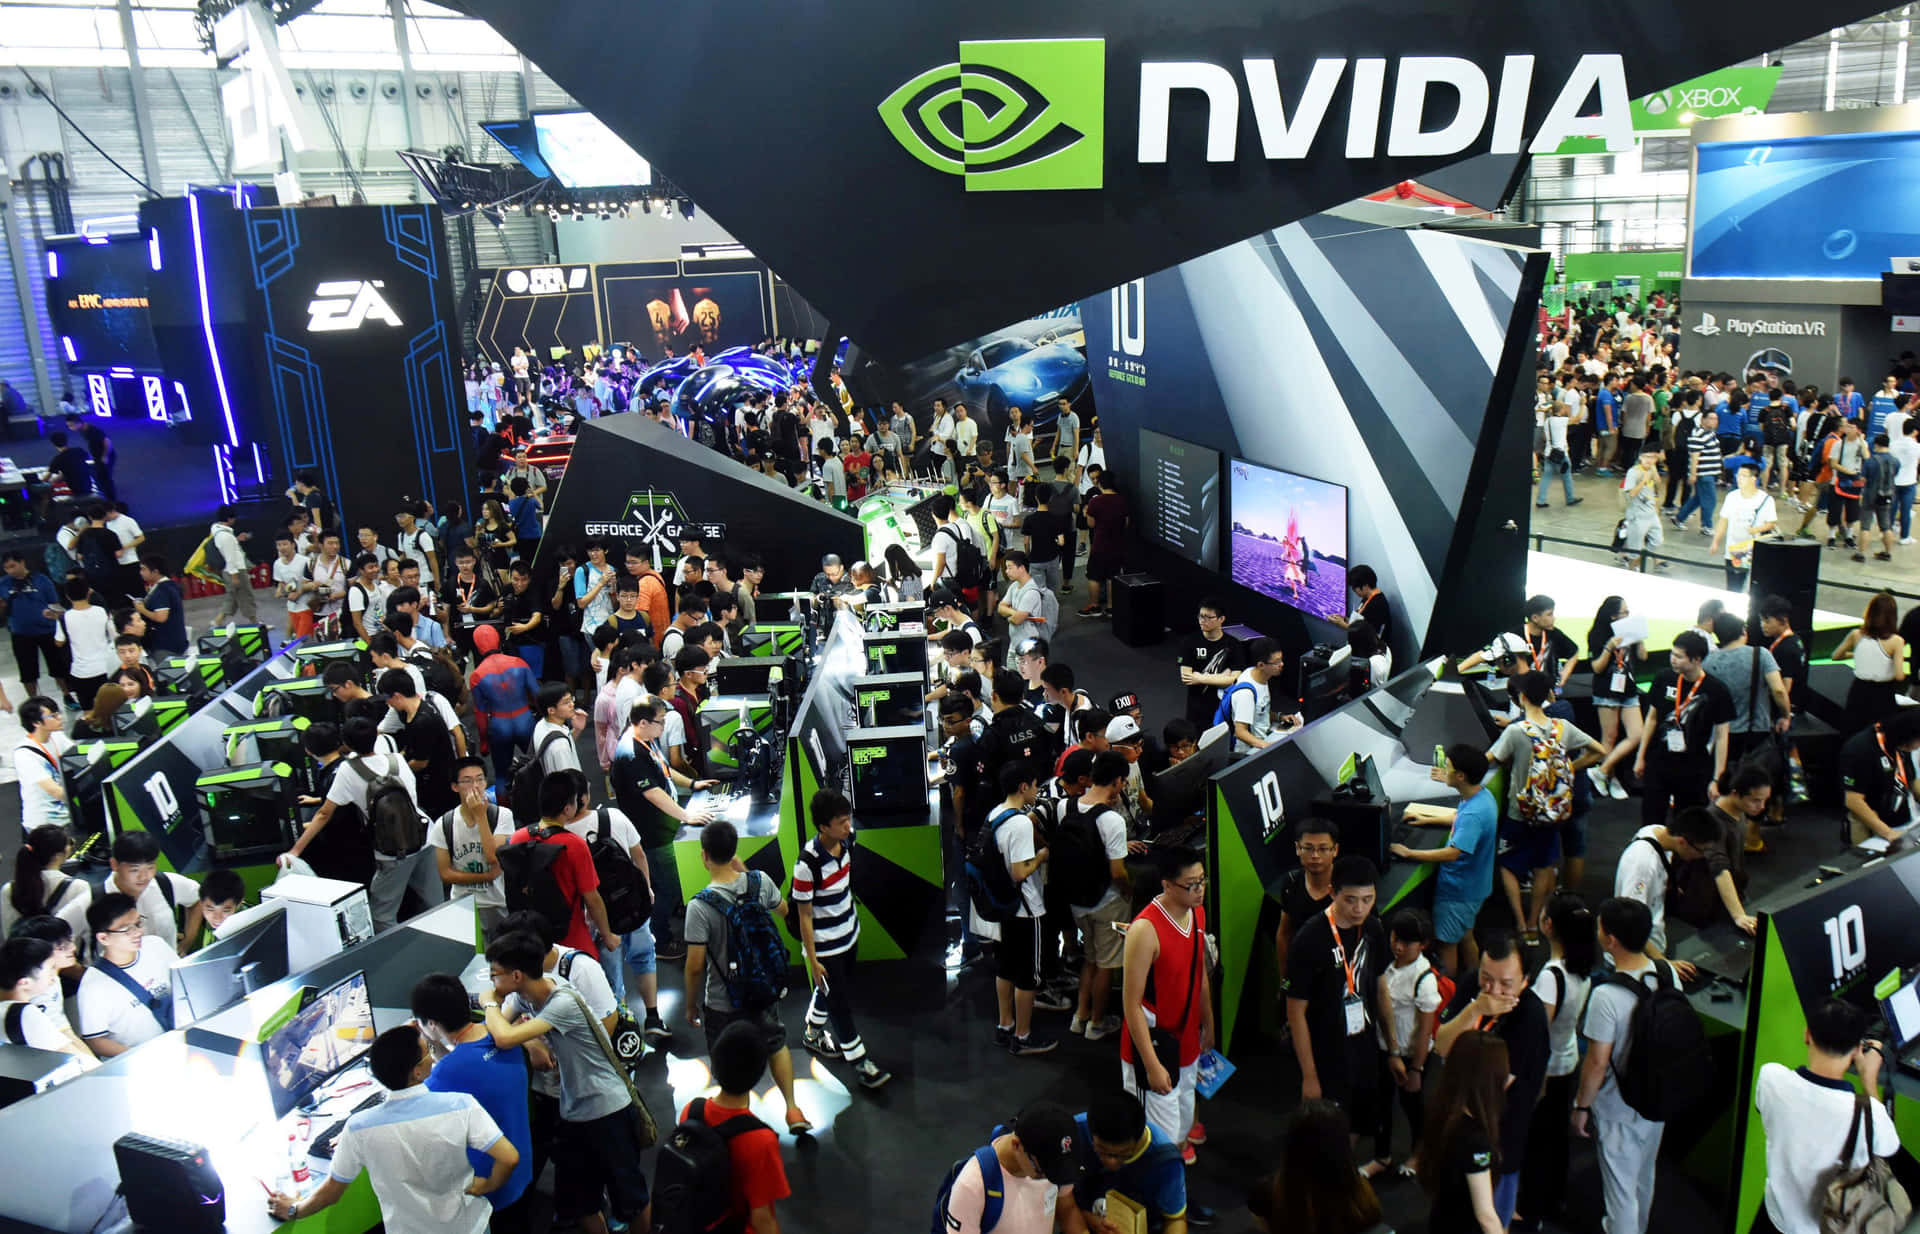 Explore the Power of Gaming with NVIDIA